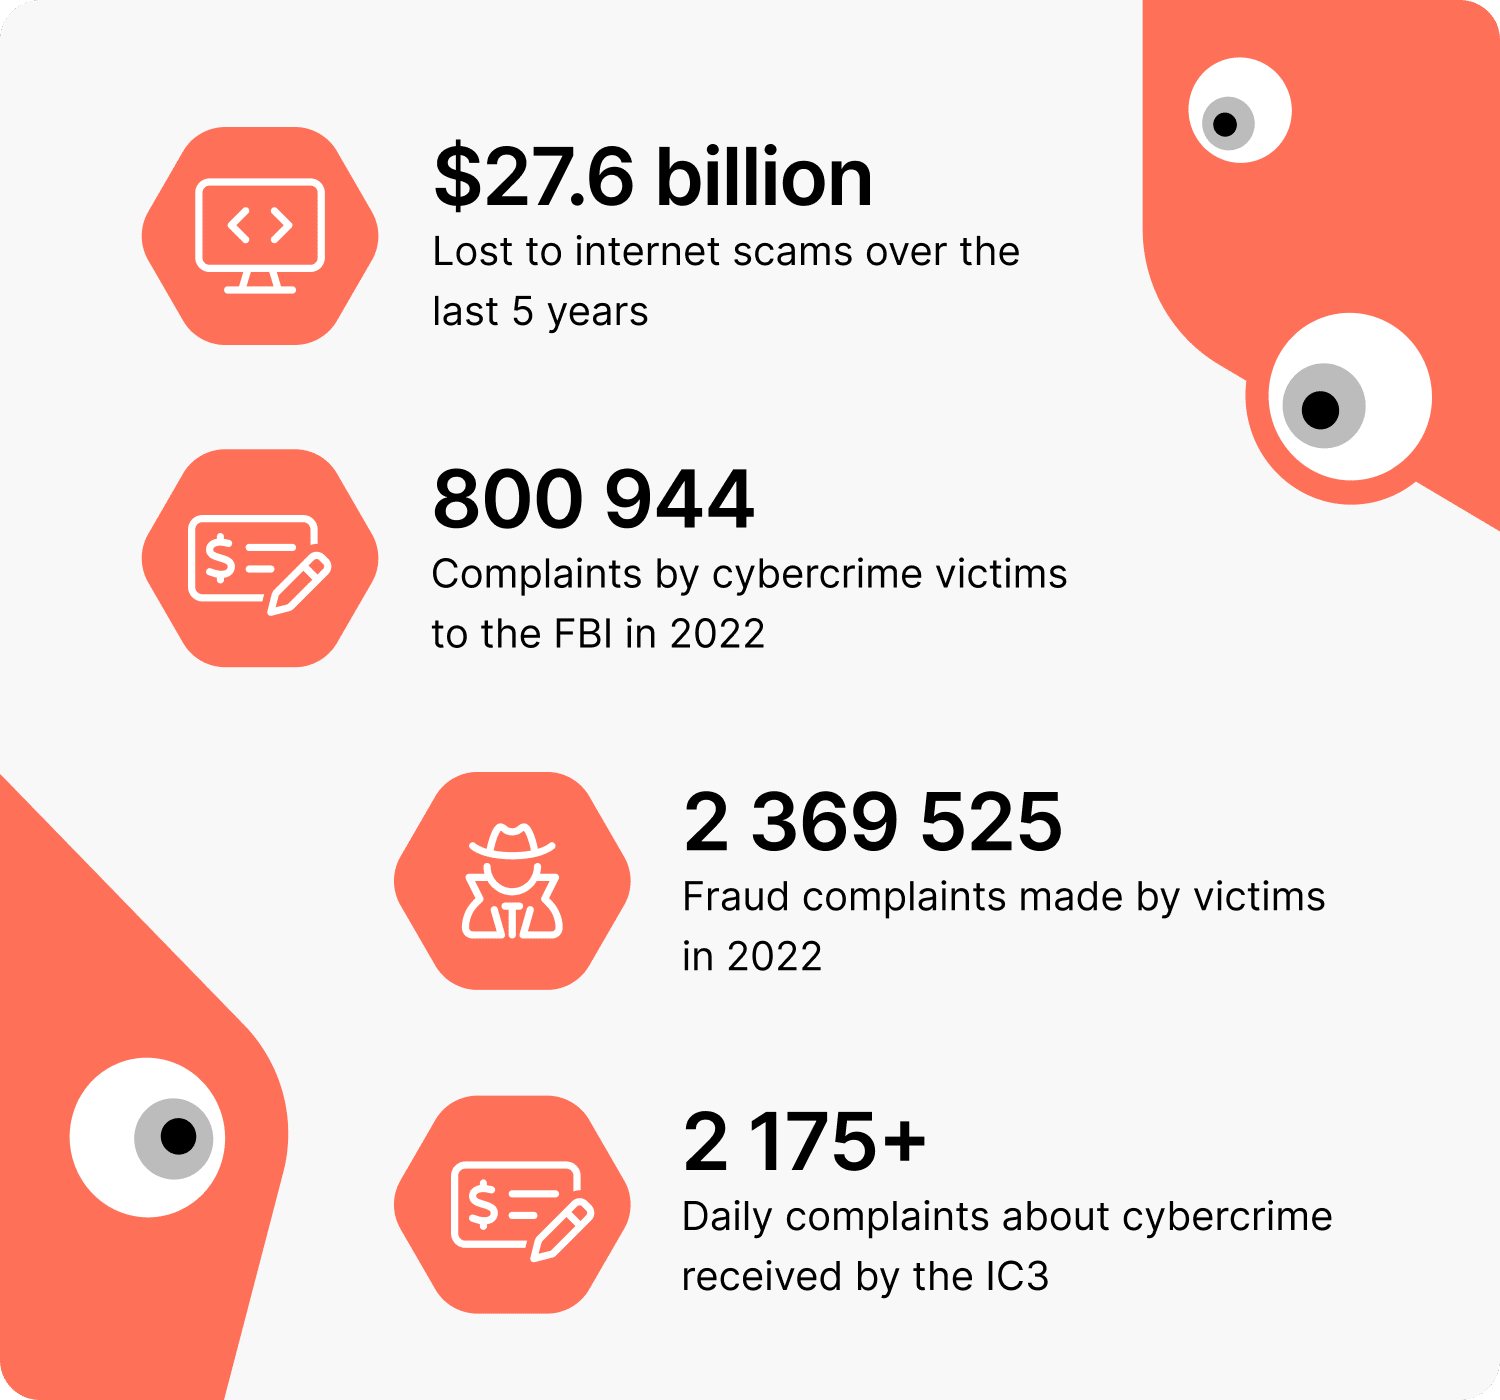 Statistics showing that cybercrime affects millions of people worldwide.